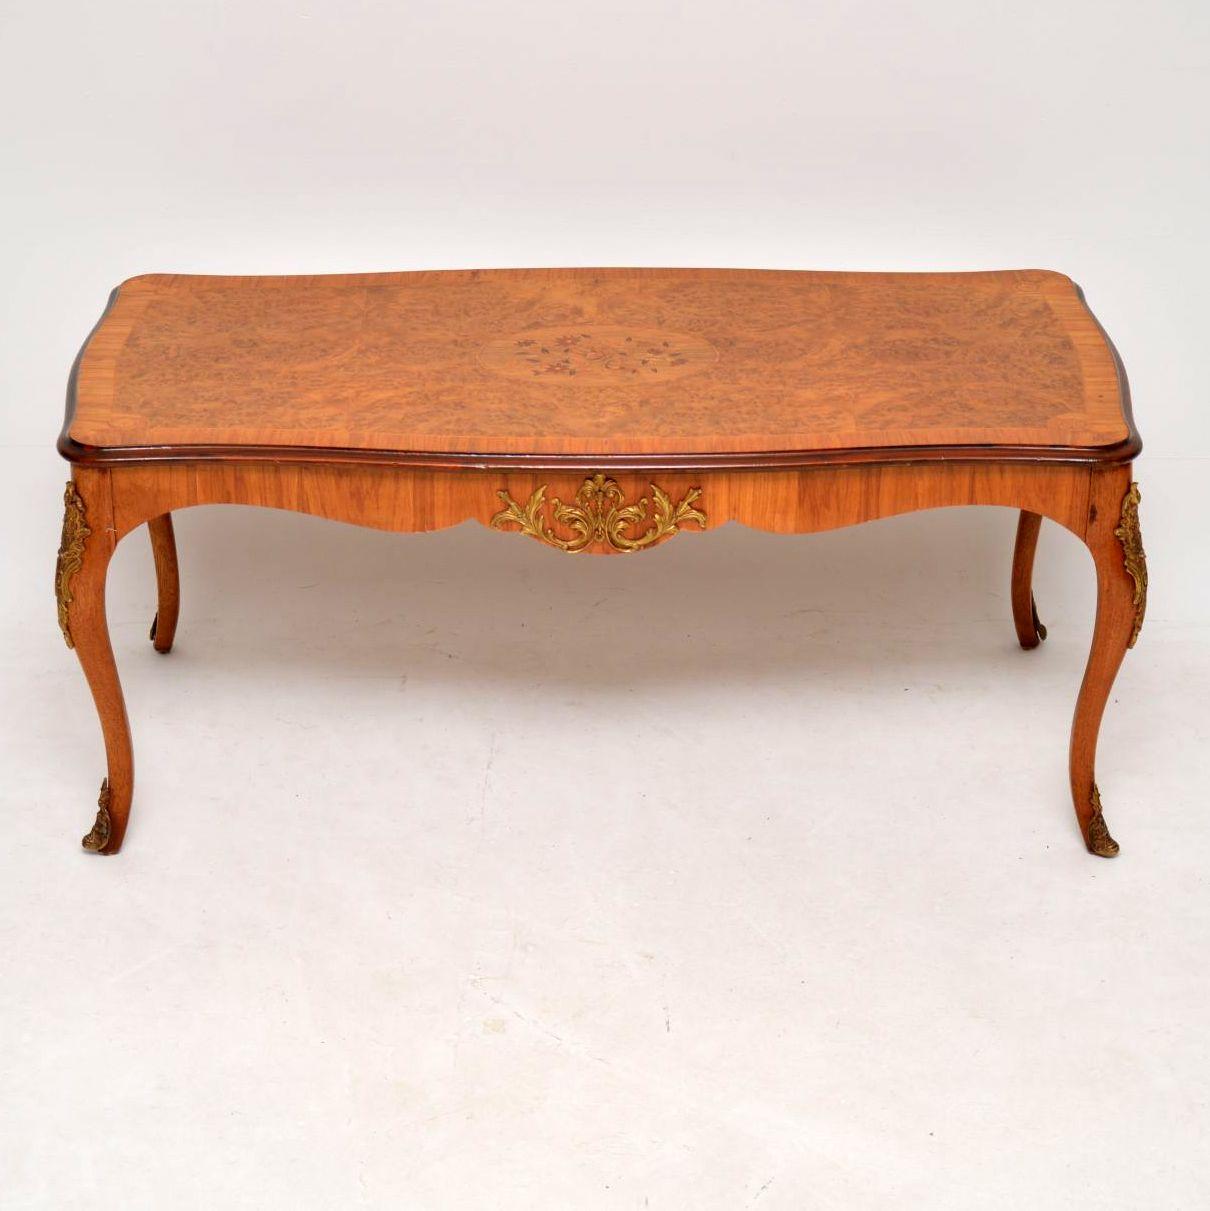 This antique French walnut coffee table has some beautiful burr walnut veneers on the top, plus a floral marquetry design inset into a central oval panel. The top is also cross banded with figured walnut and has other inlaid features. This table has